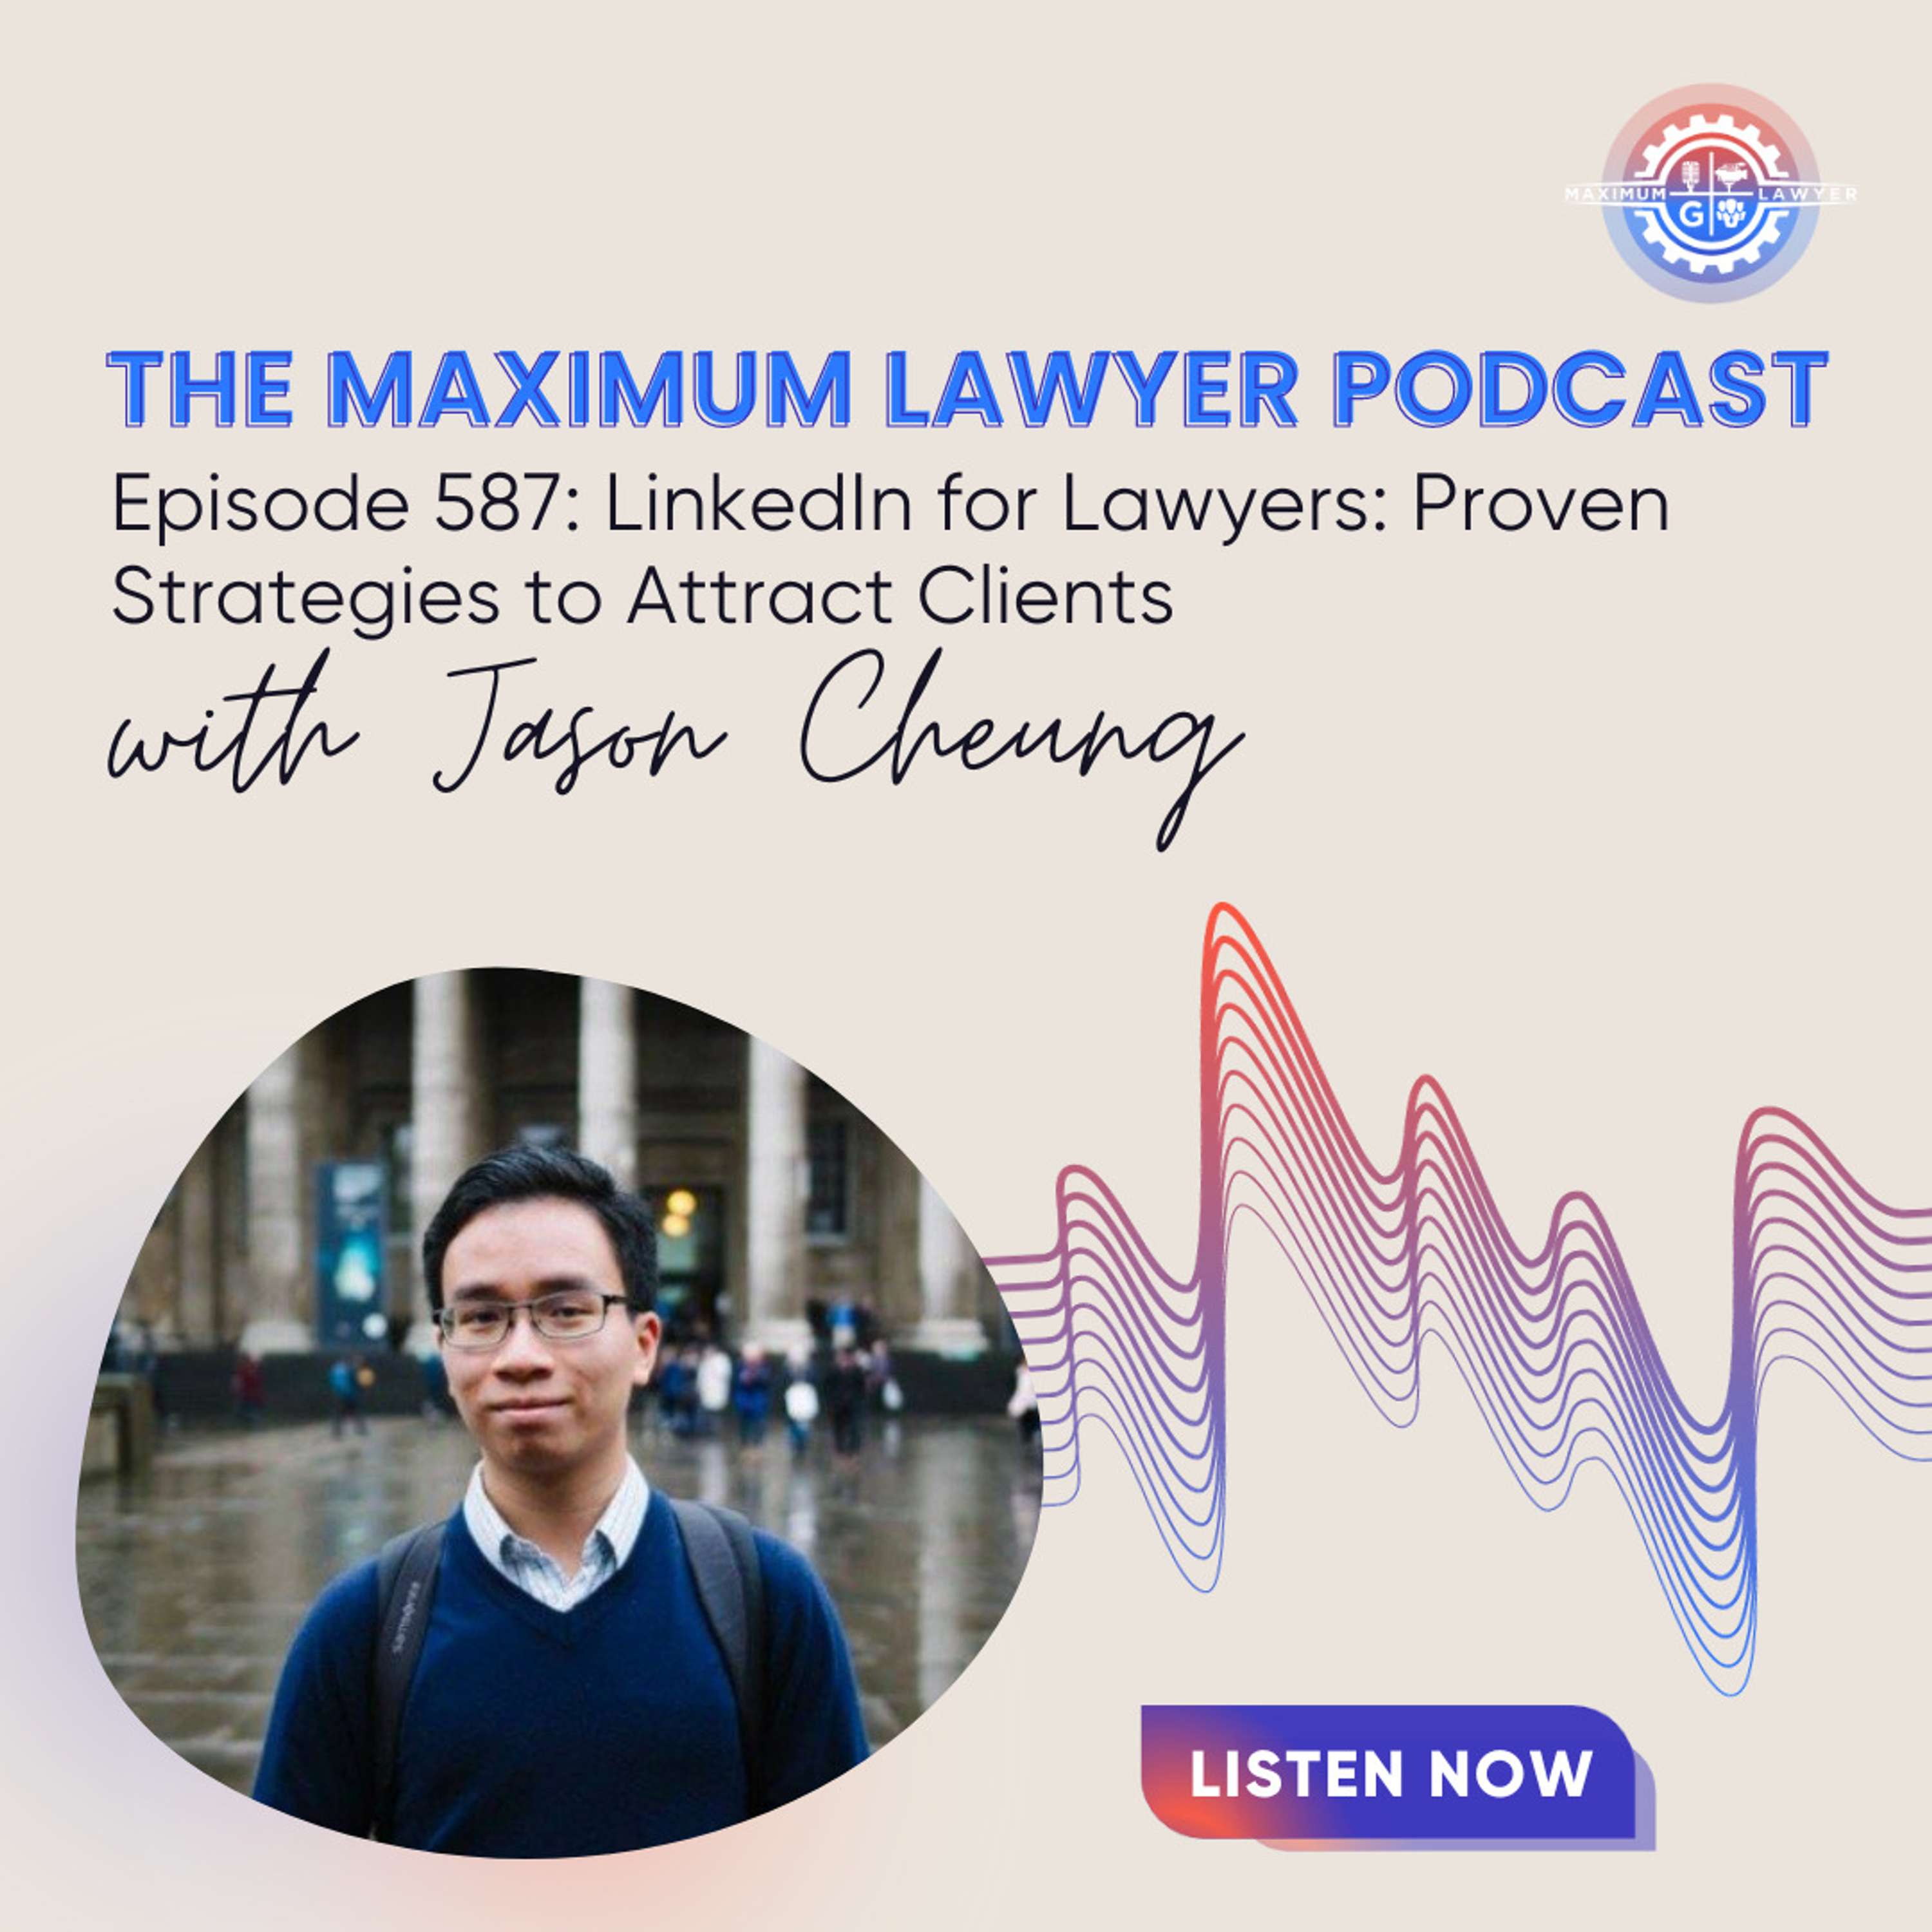 LinkedIn for Lawyers: Proven Strategies to Attract Clients with Jason Cheung